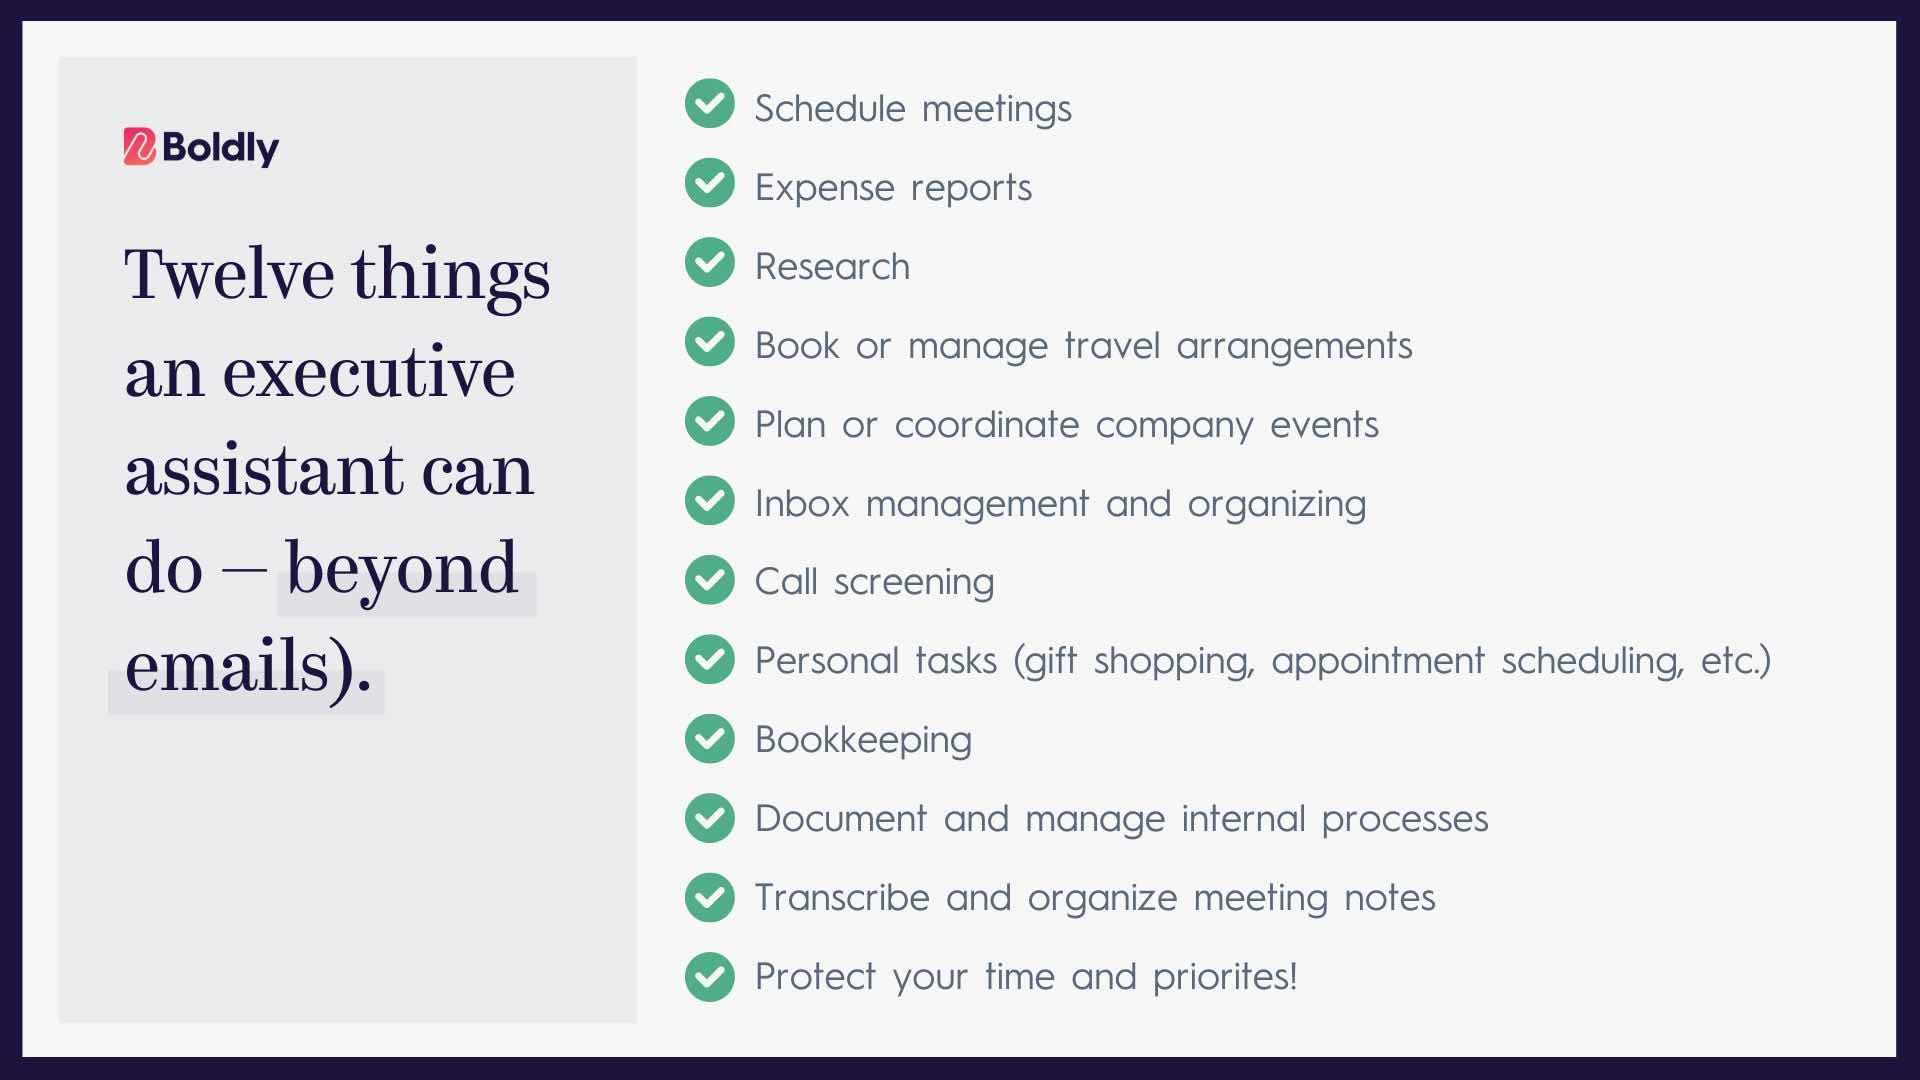 Chart showing 12 things an executive assistant can do besides sending emails -- from managing schedules to bookkeeping and more.